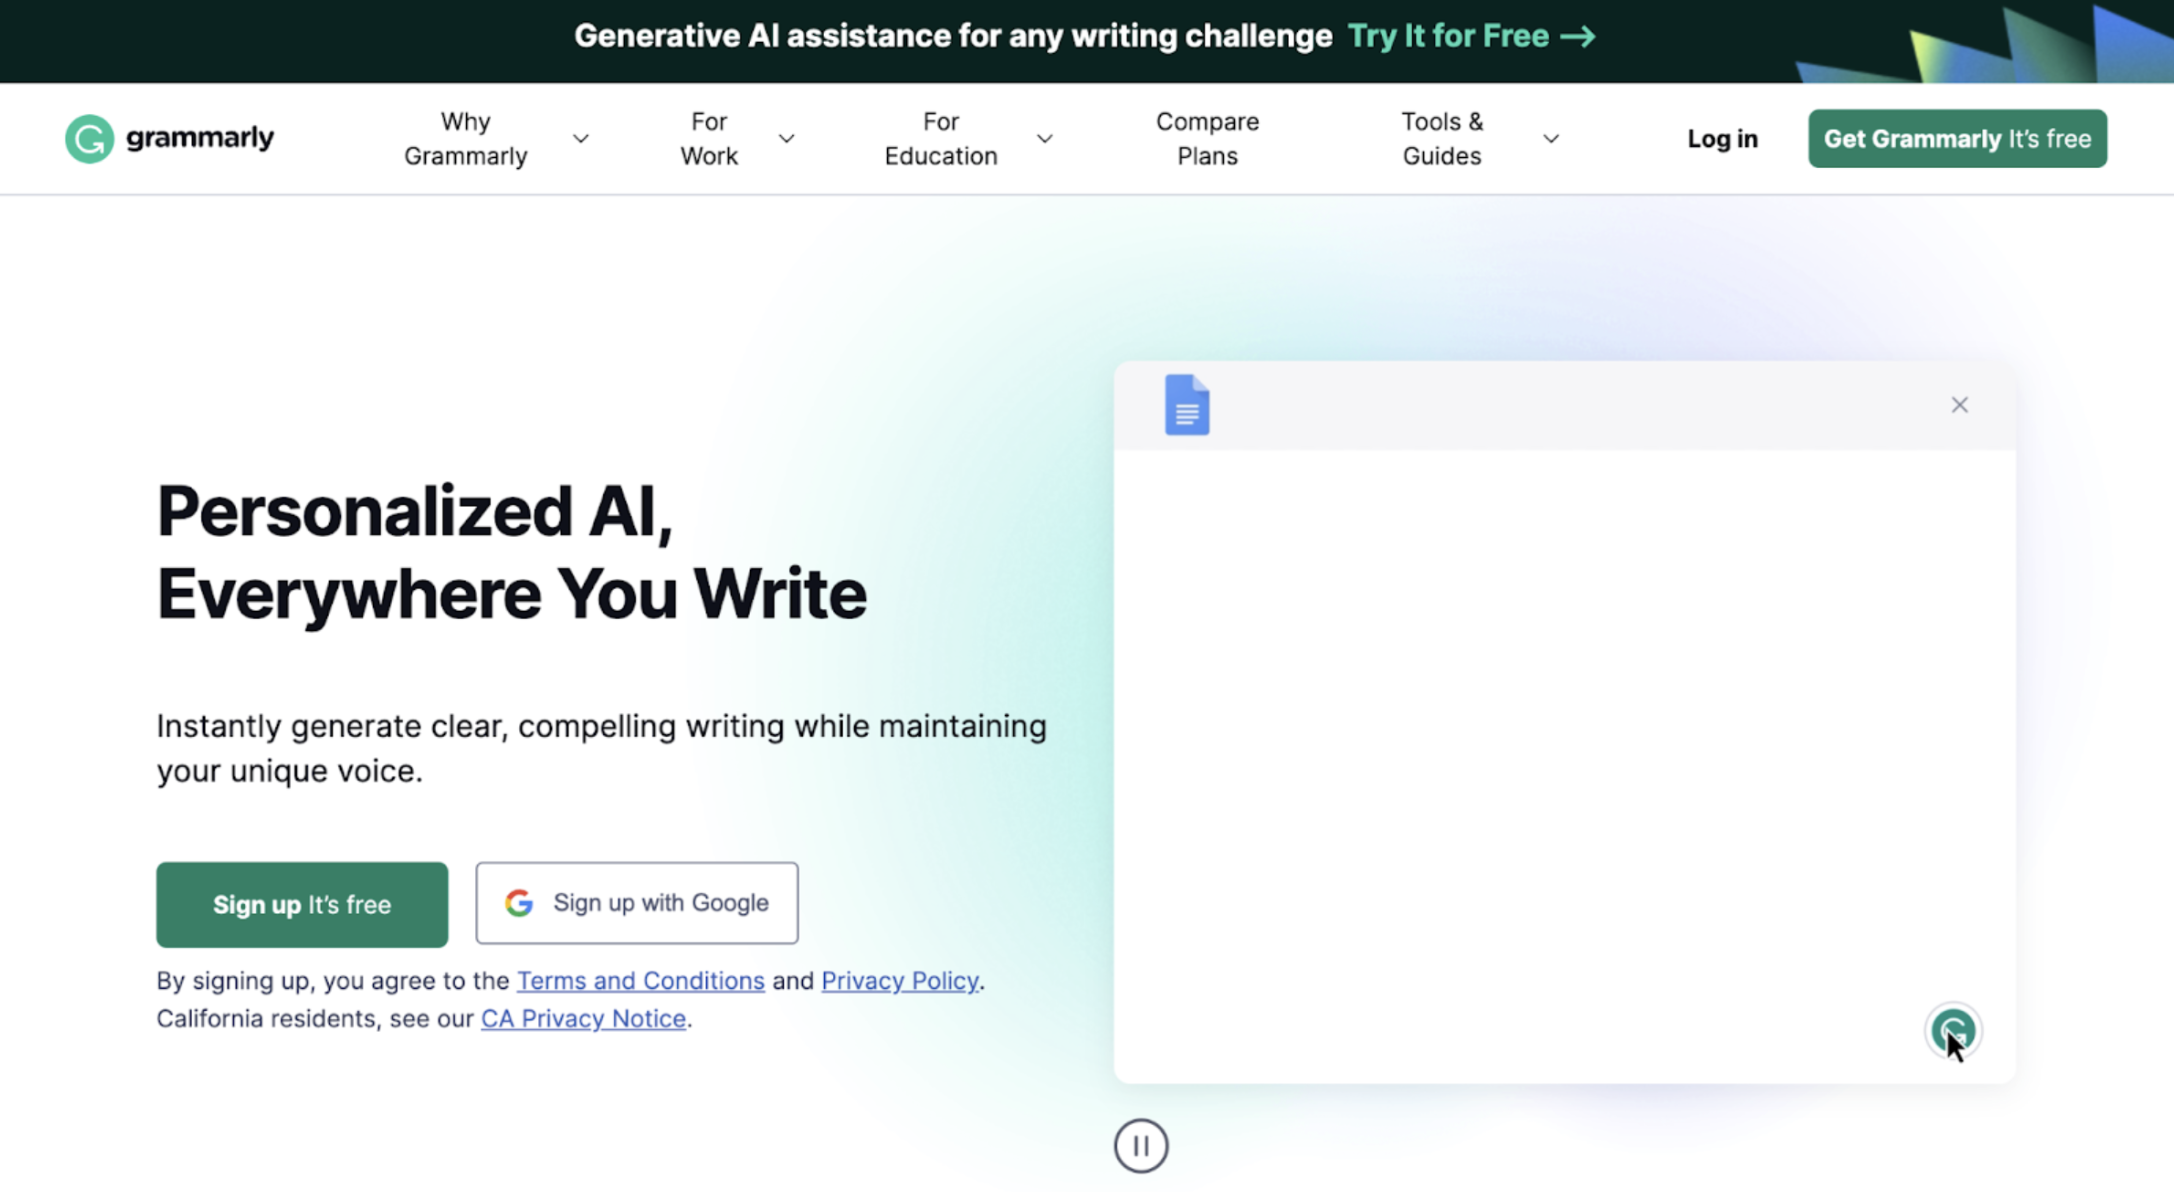 example of crafting a compelling value proposition by grammarly